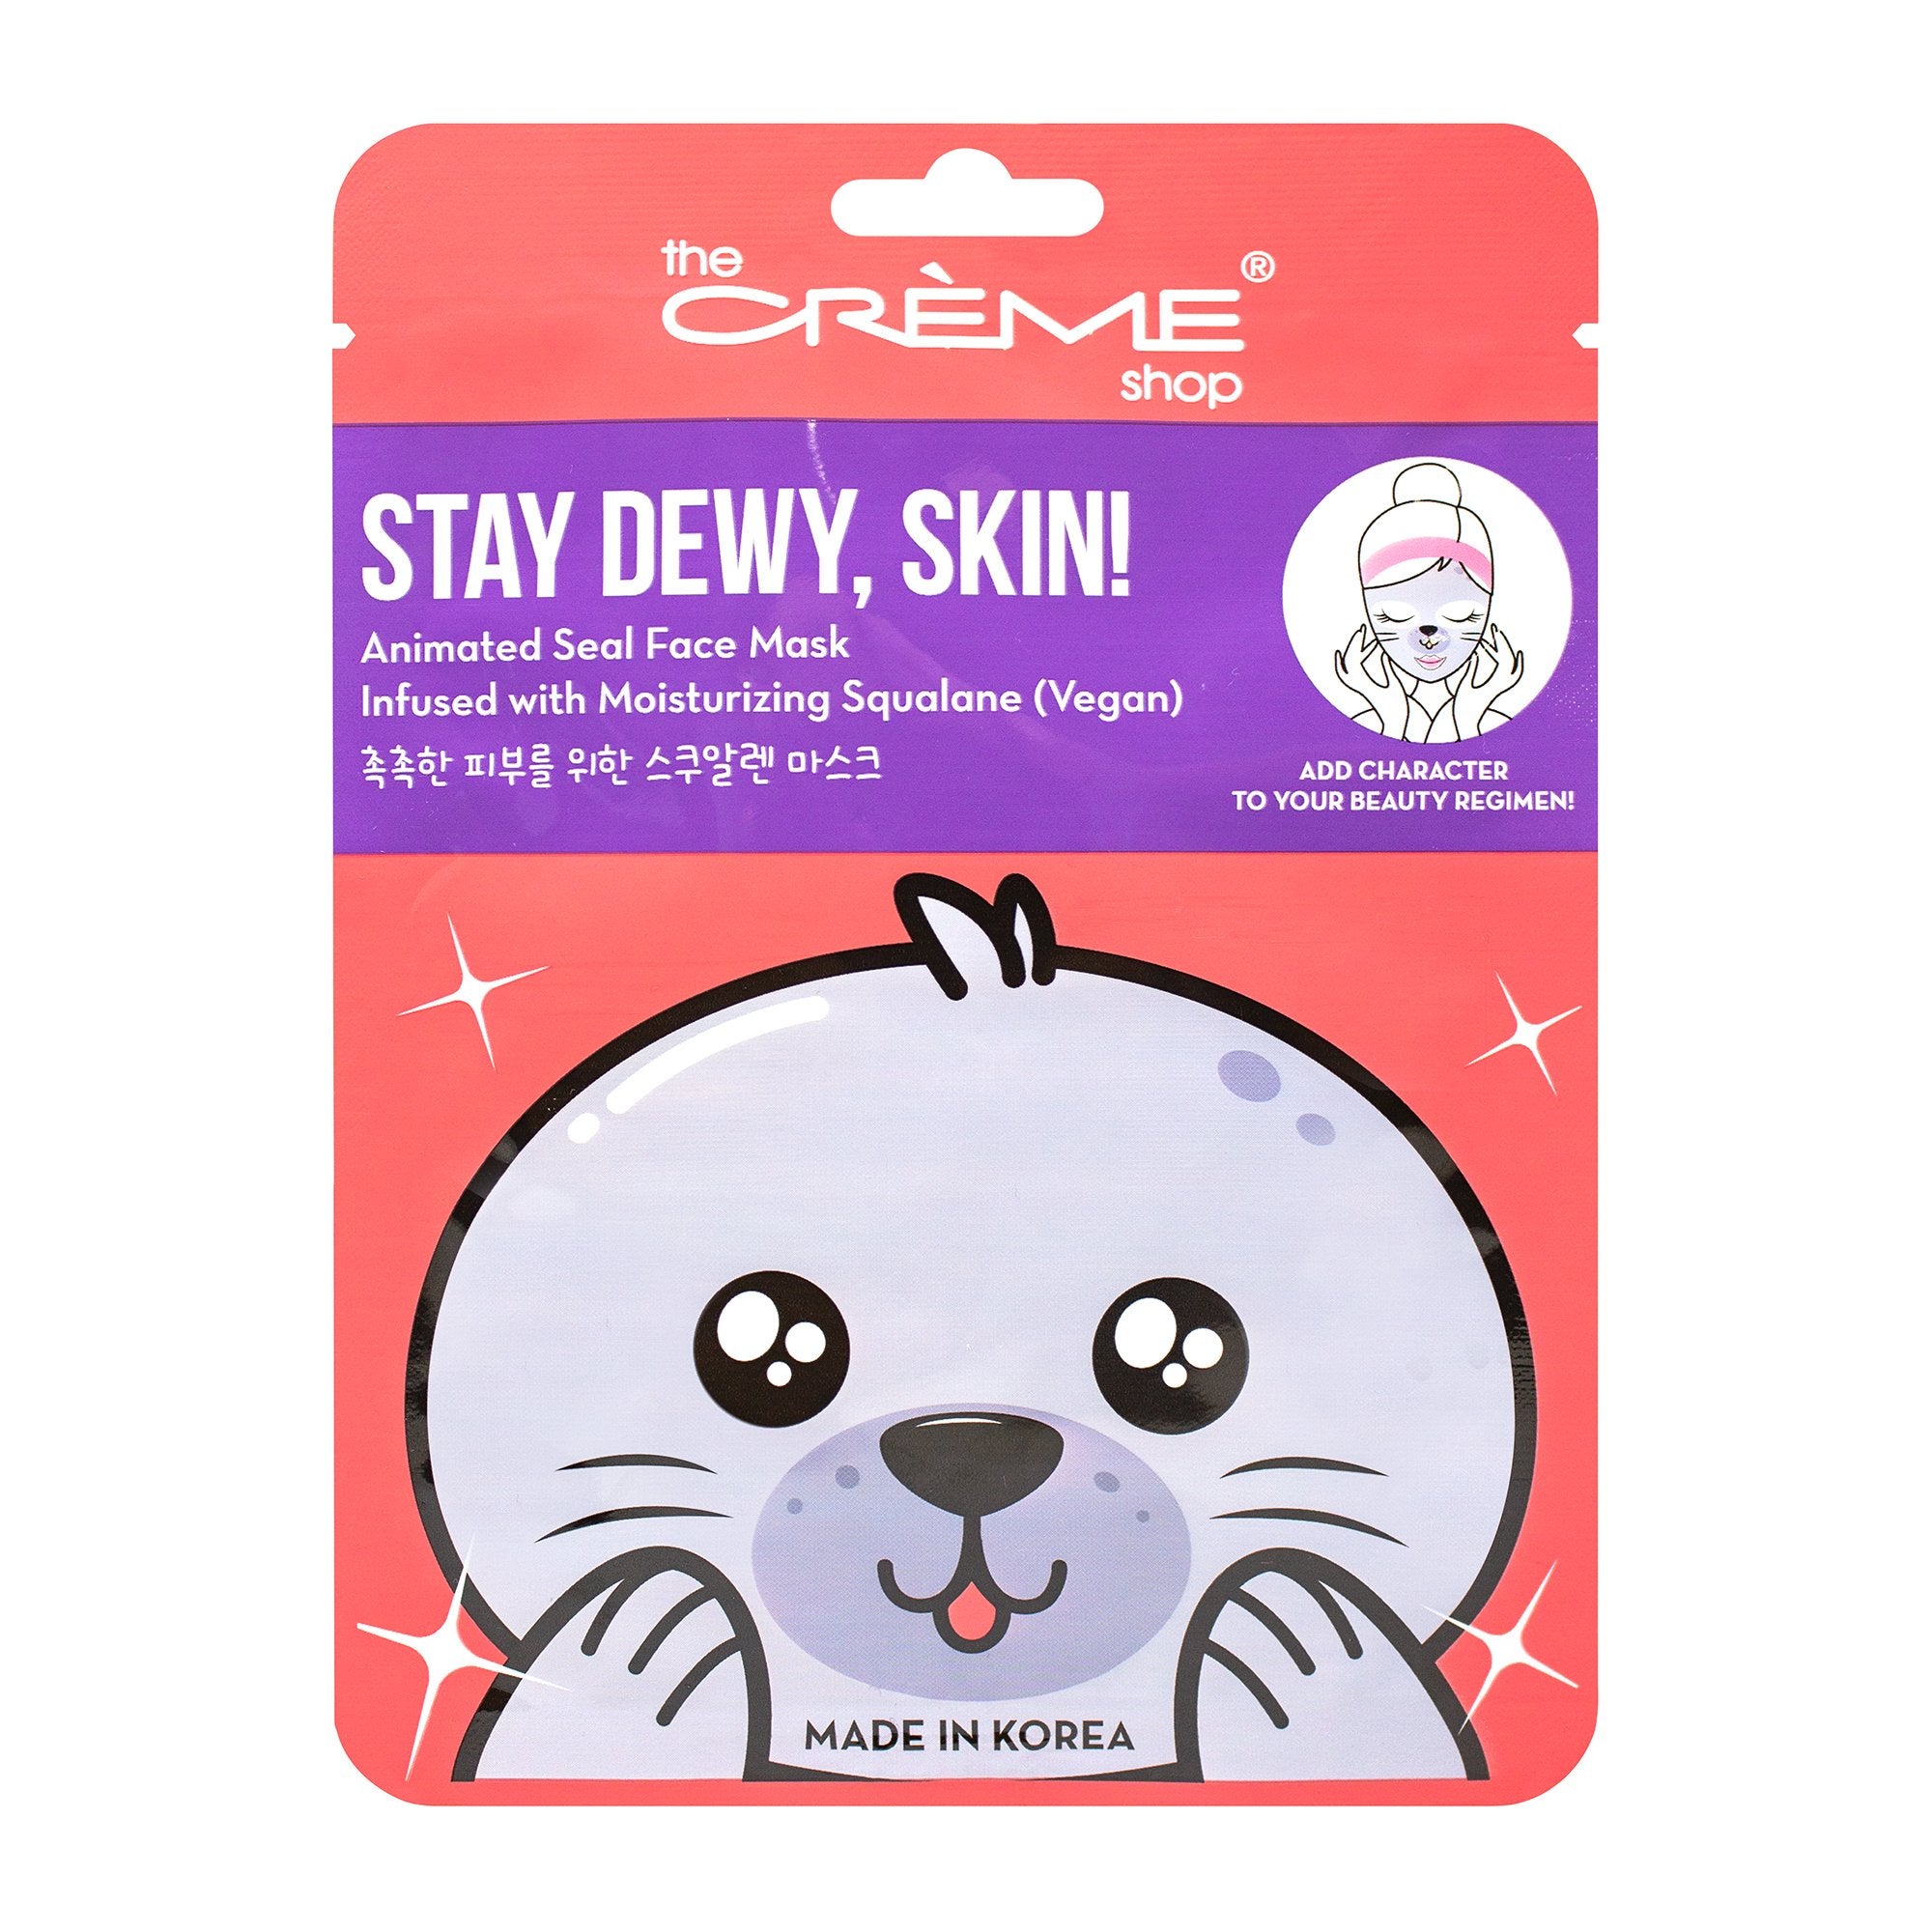 Stay Dewy, Skin! Animated Seal Face Mask - Infused with Moisturizing Vegan Squalane Animated Sheet Masks The Crème Shop 